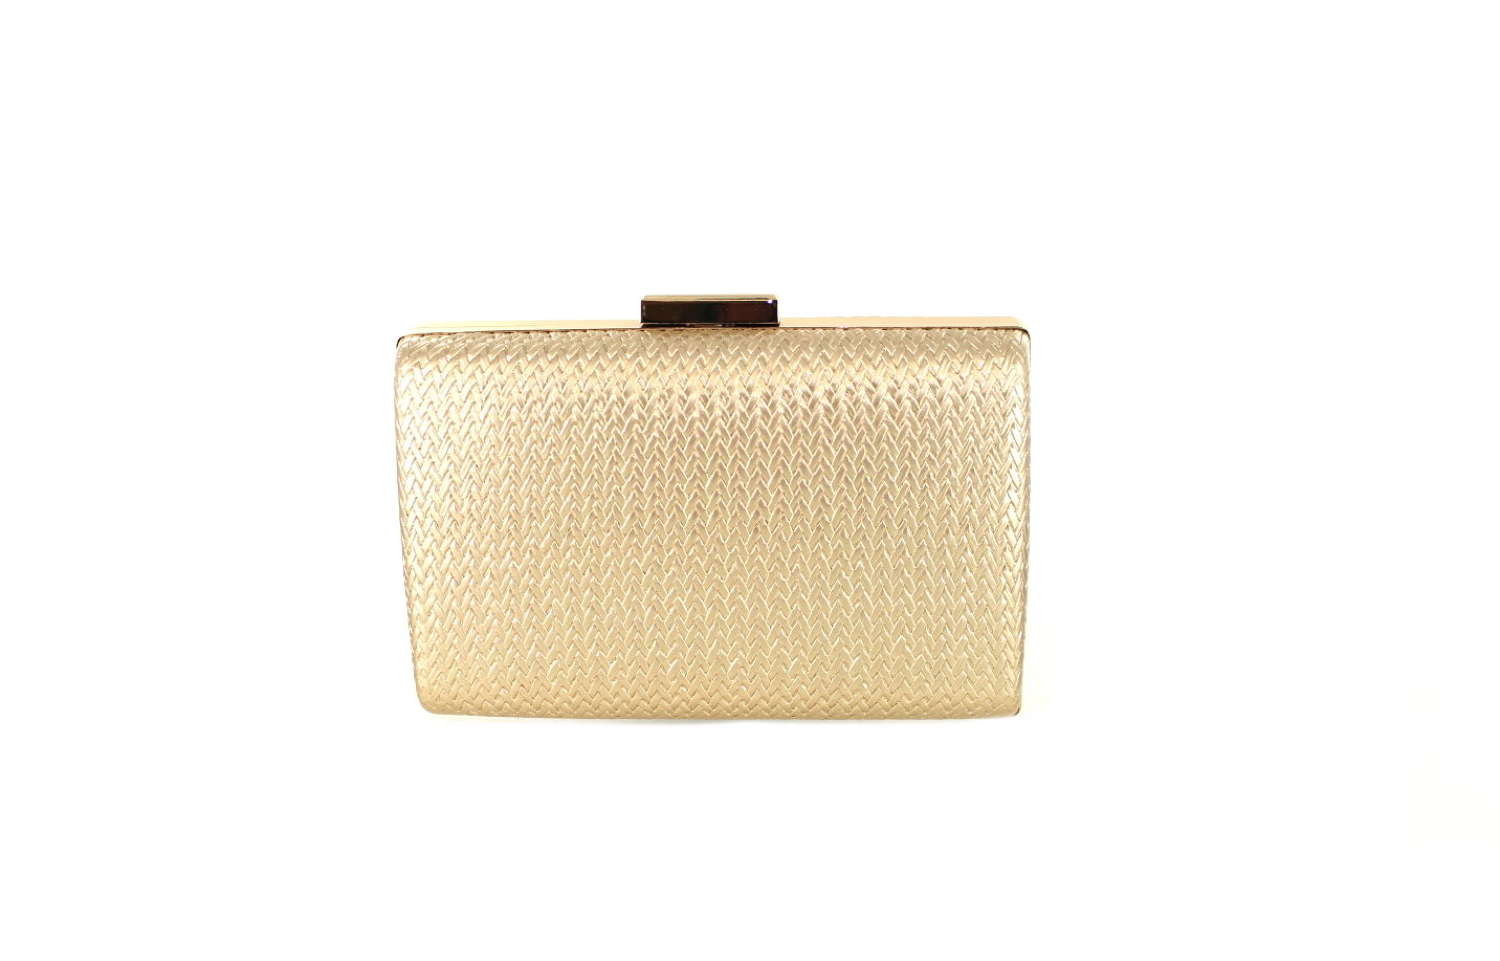 Woven effect hard cased evening bag.